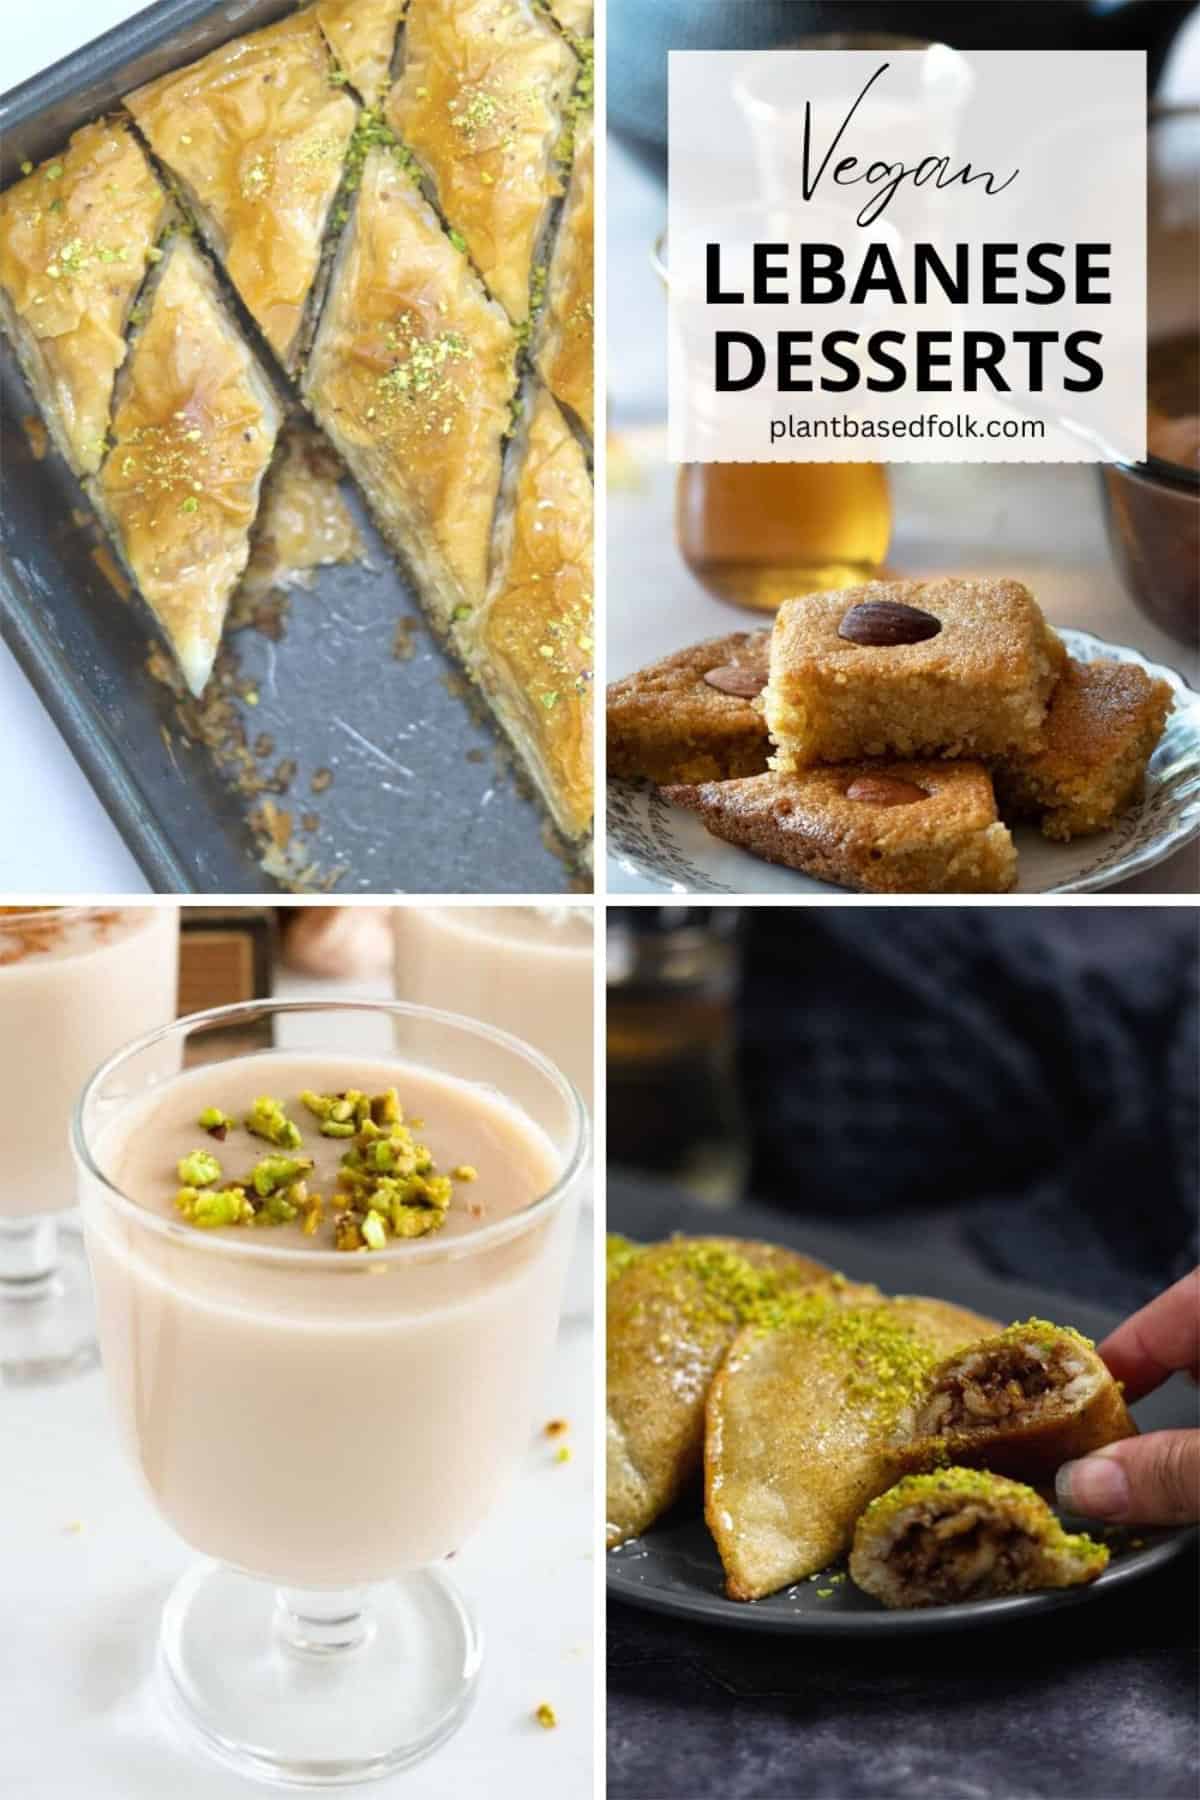 a collage of four different Lebanese desserts, including a tray of baklawa, flat cake, white pudding and stuffed pancakes